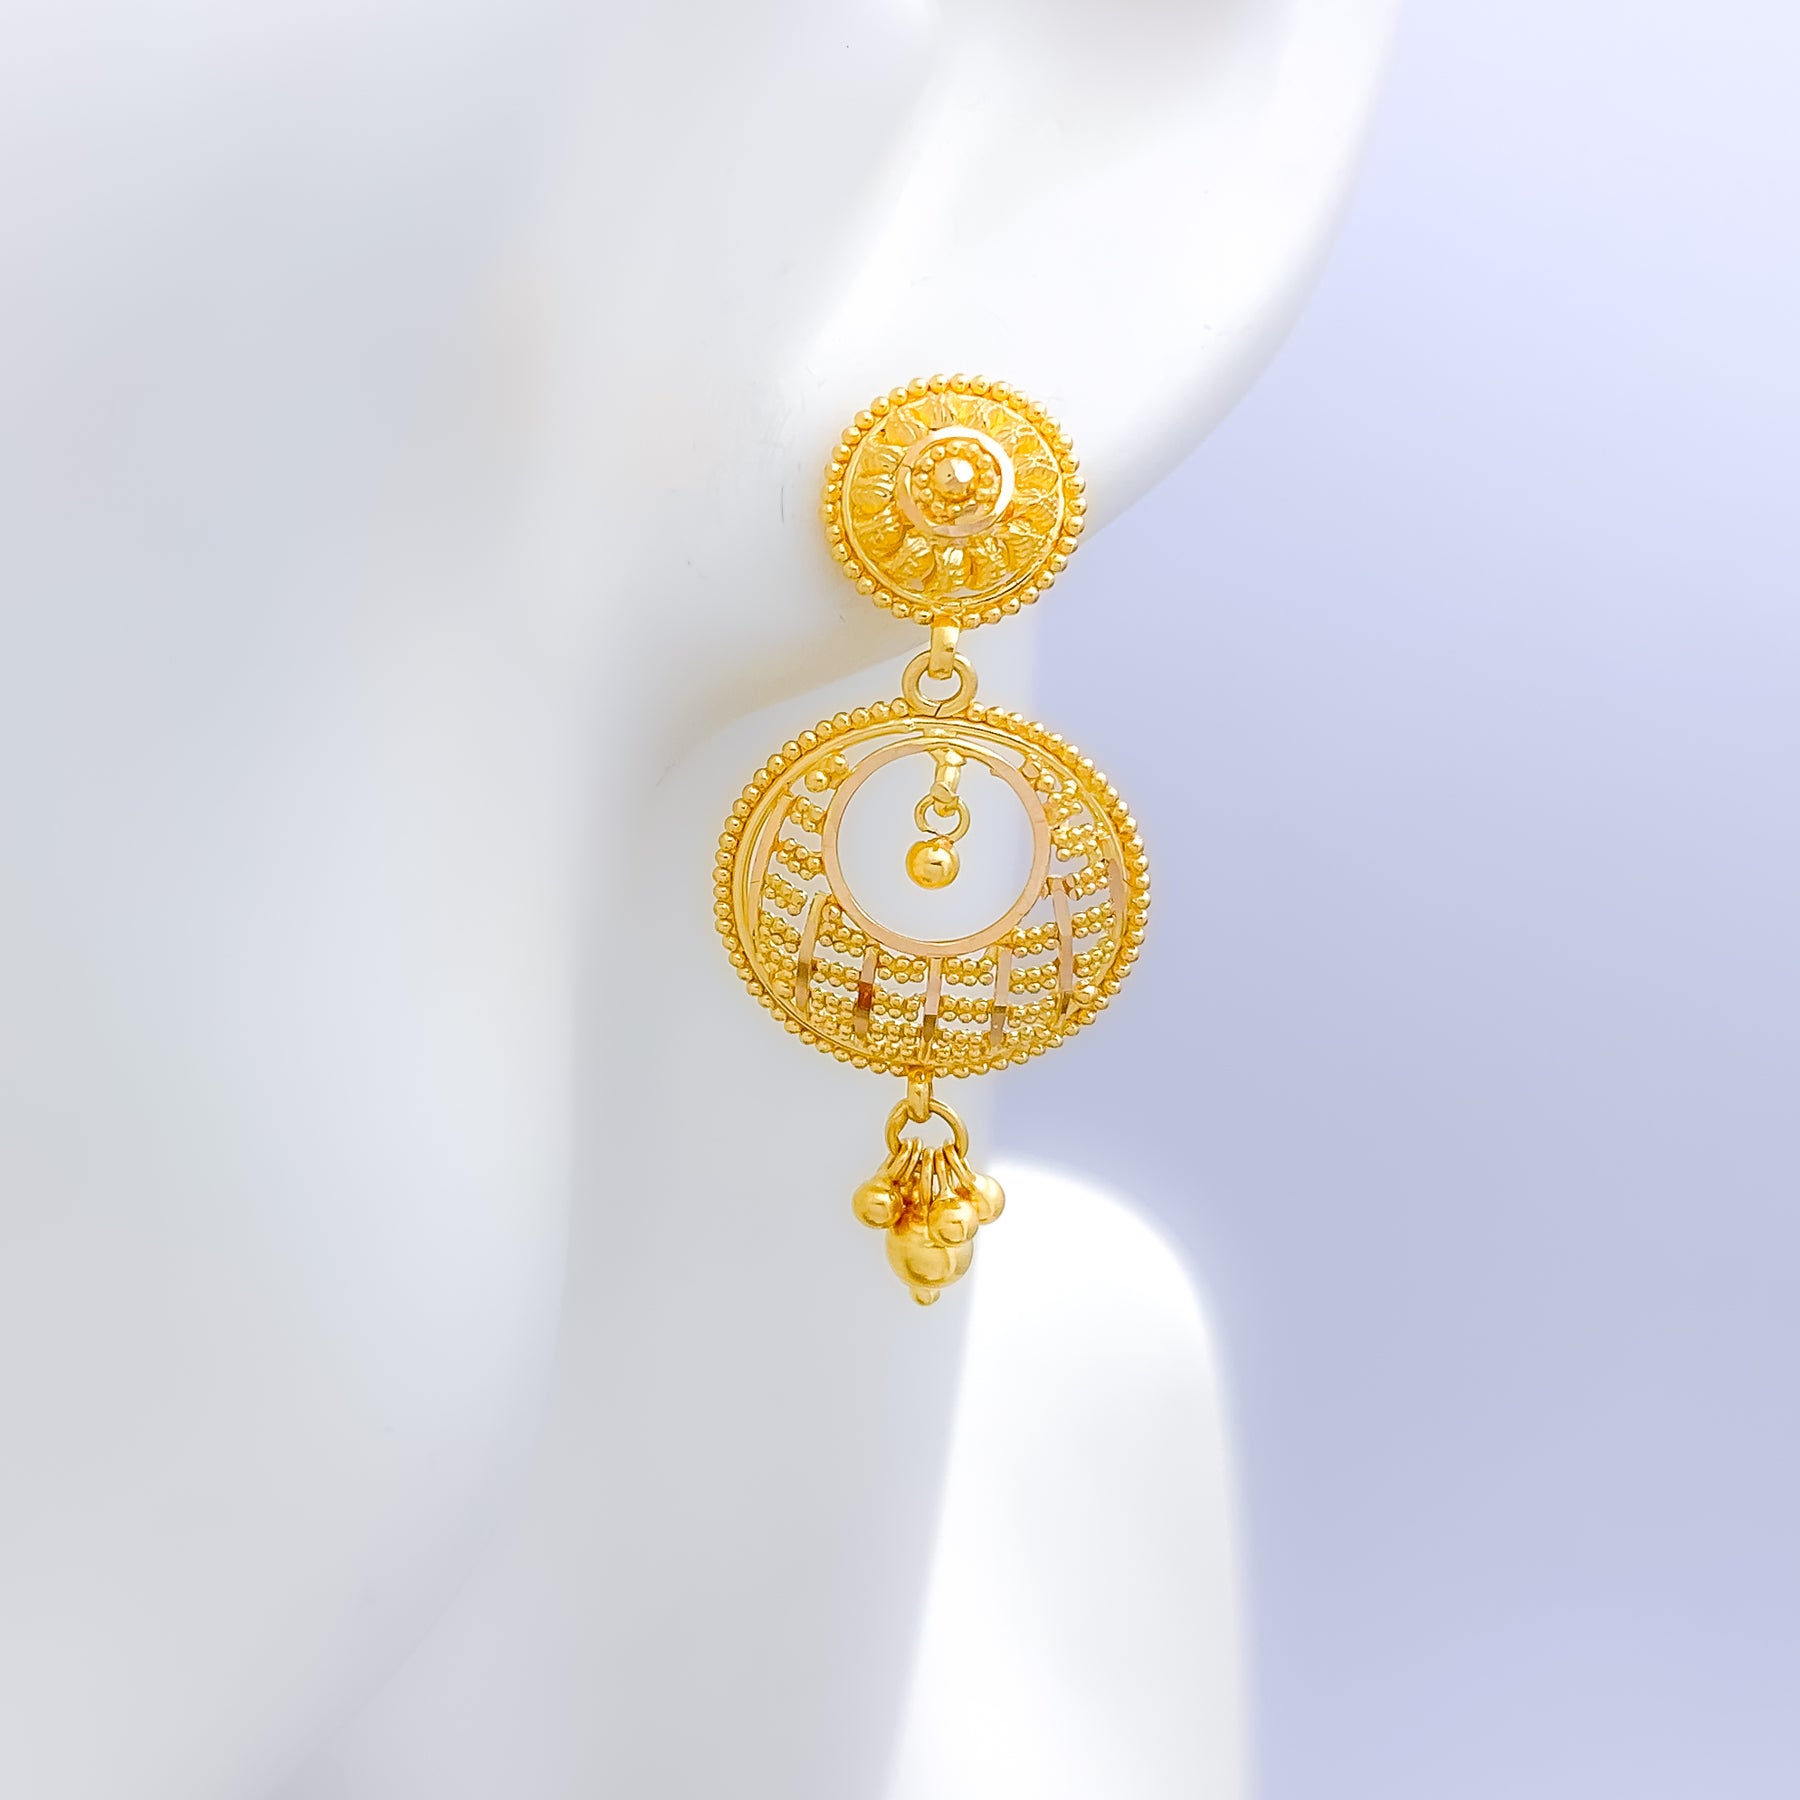 14kt Solid Yellow Gold Thick Round Hoop Earrings With A Diamond Cut Design  25mmX3mm - Walmart.com